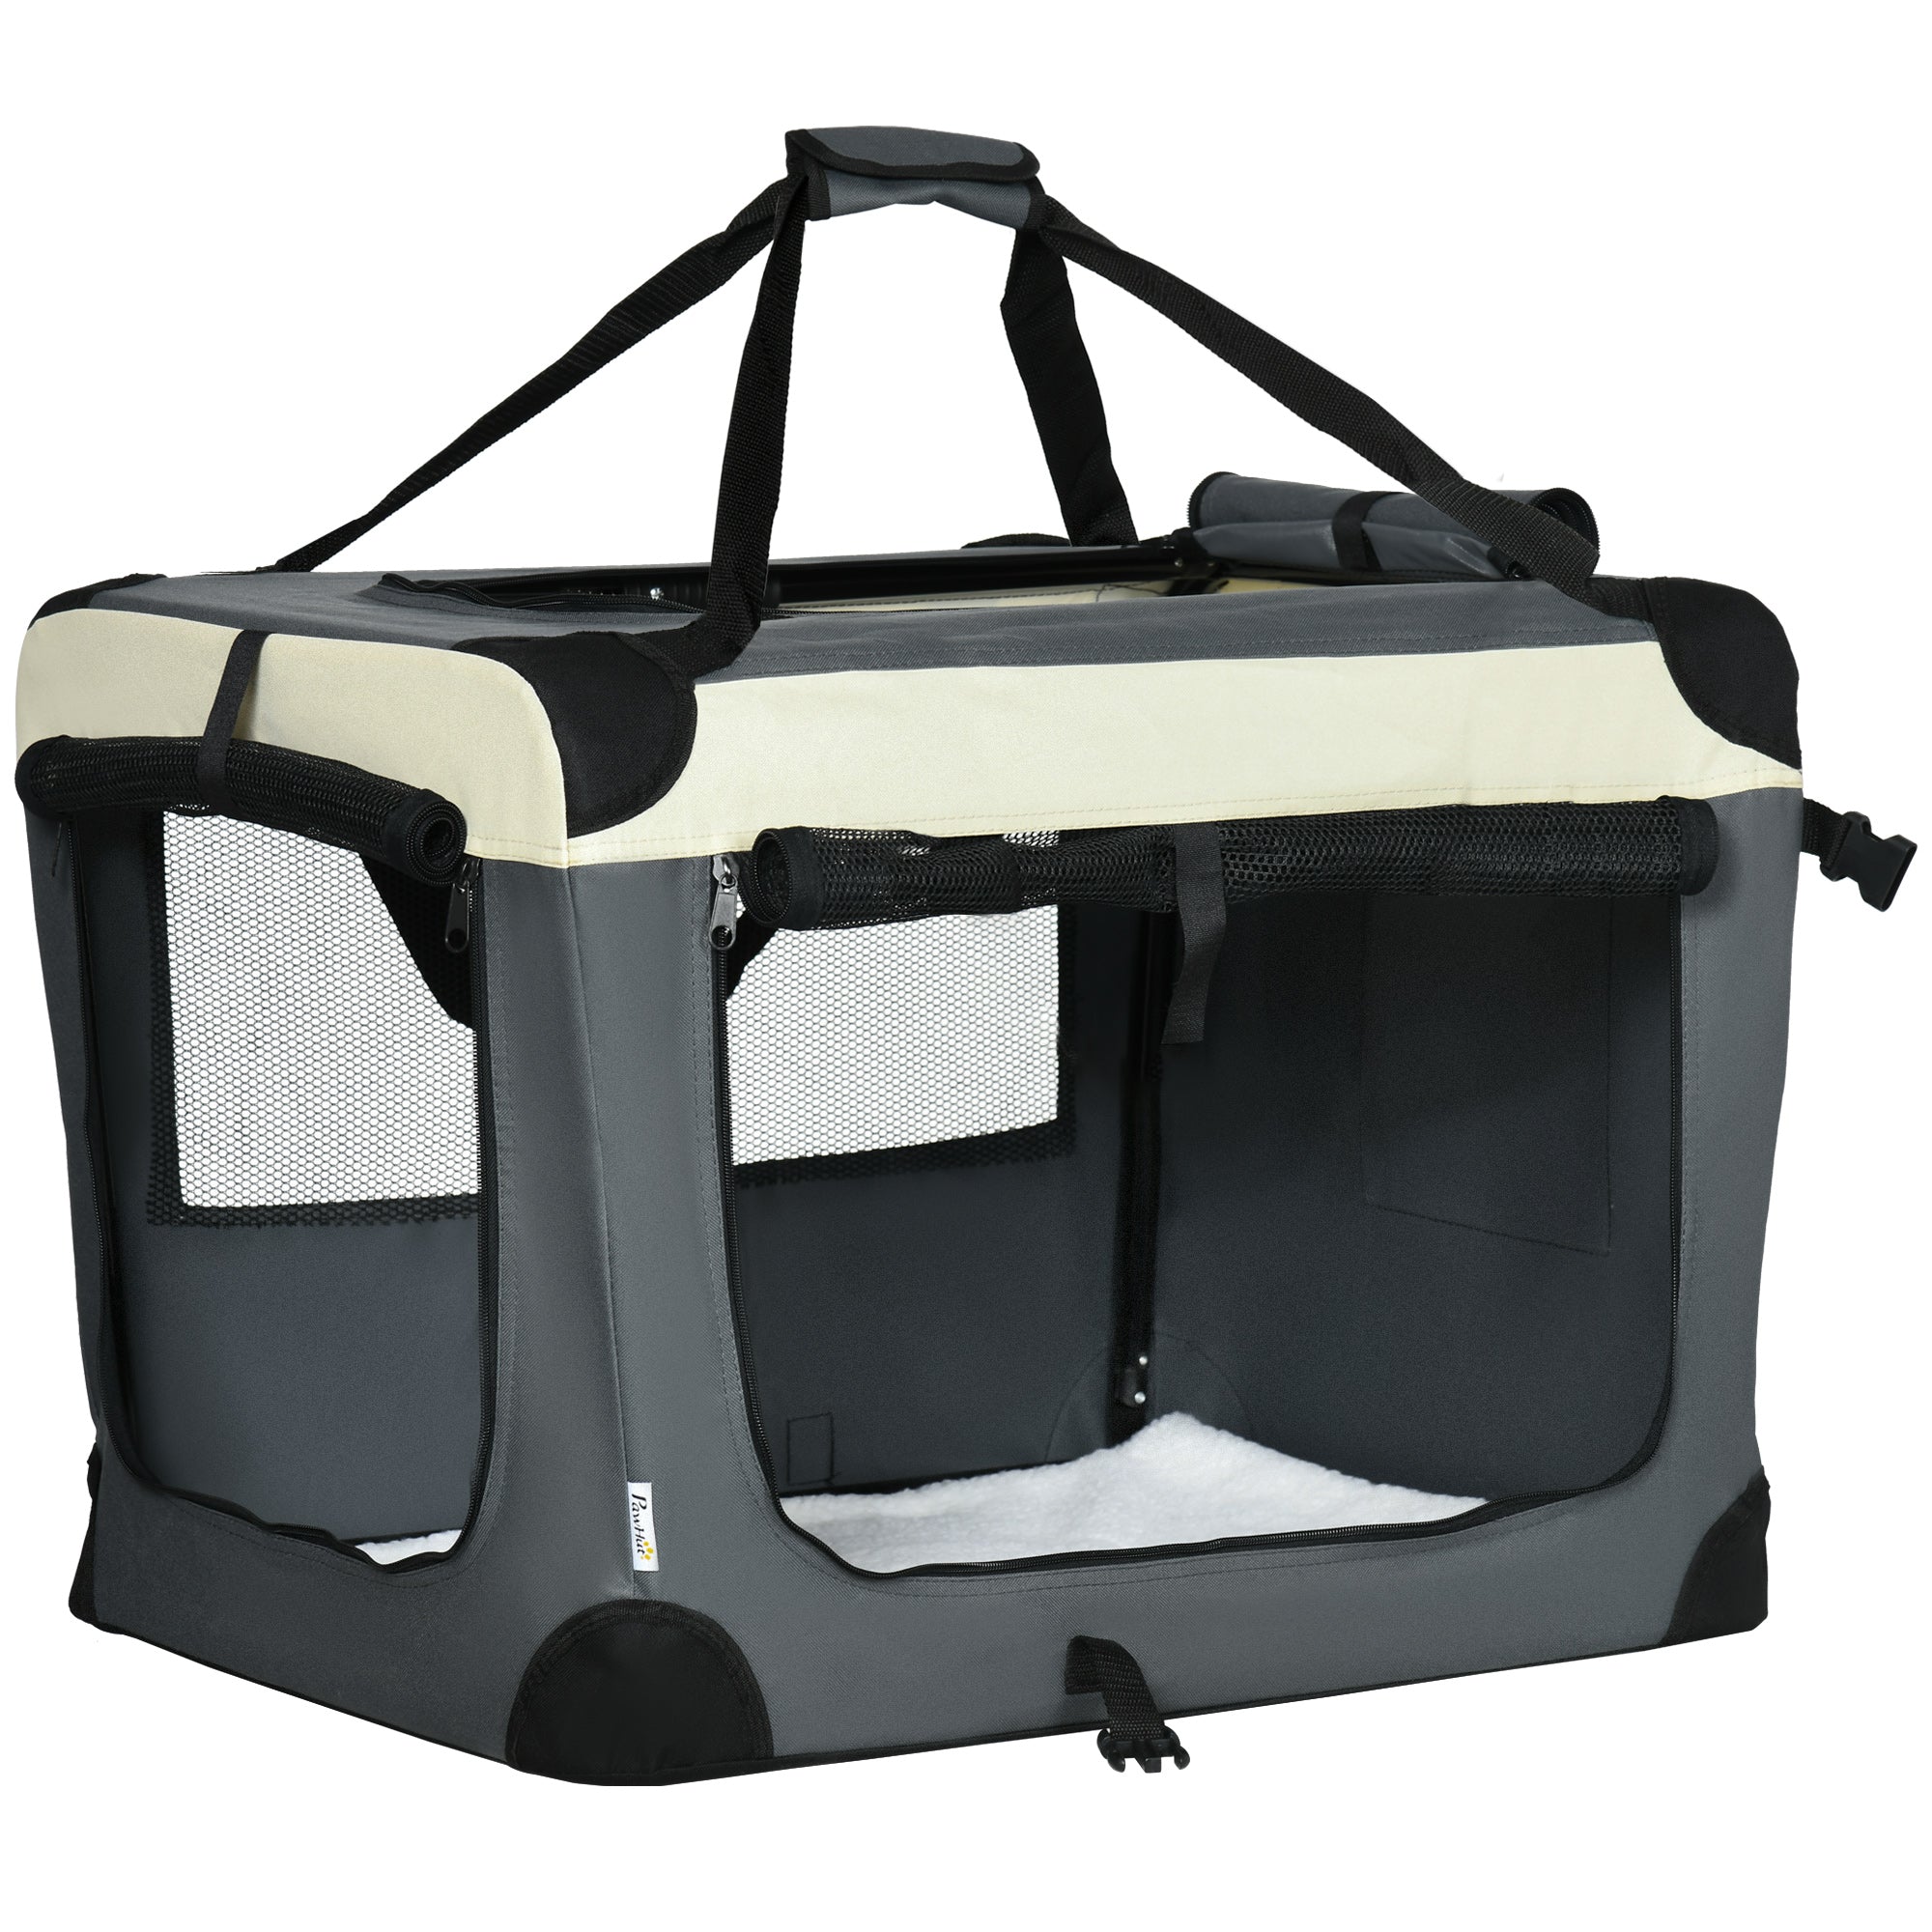 PawHut 70cm Foldable Pet Carrier Bag Soft Travel Dog Crate for Small Dogs Grey  | TJ Hughes